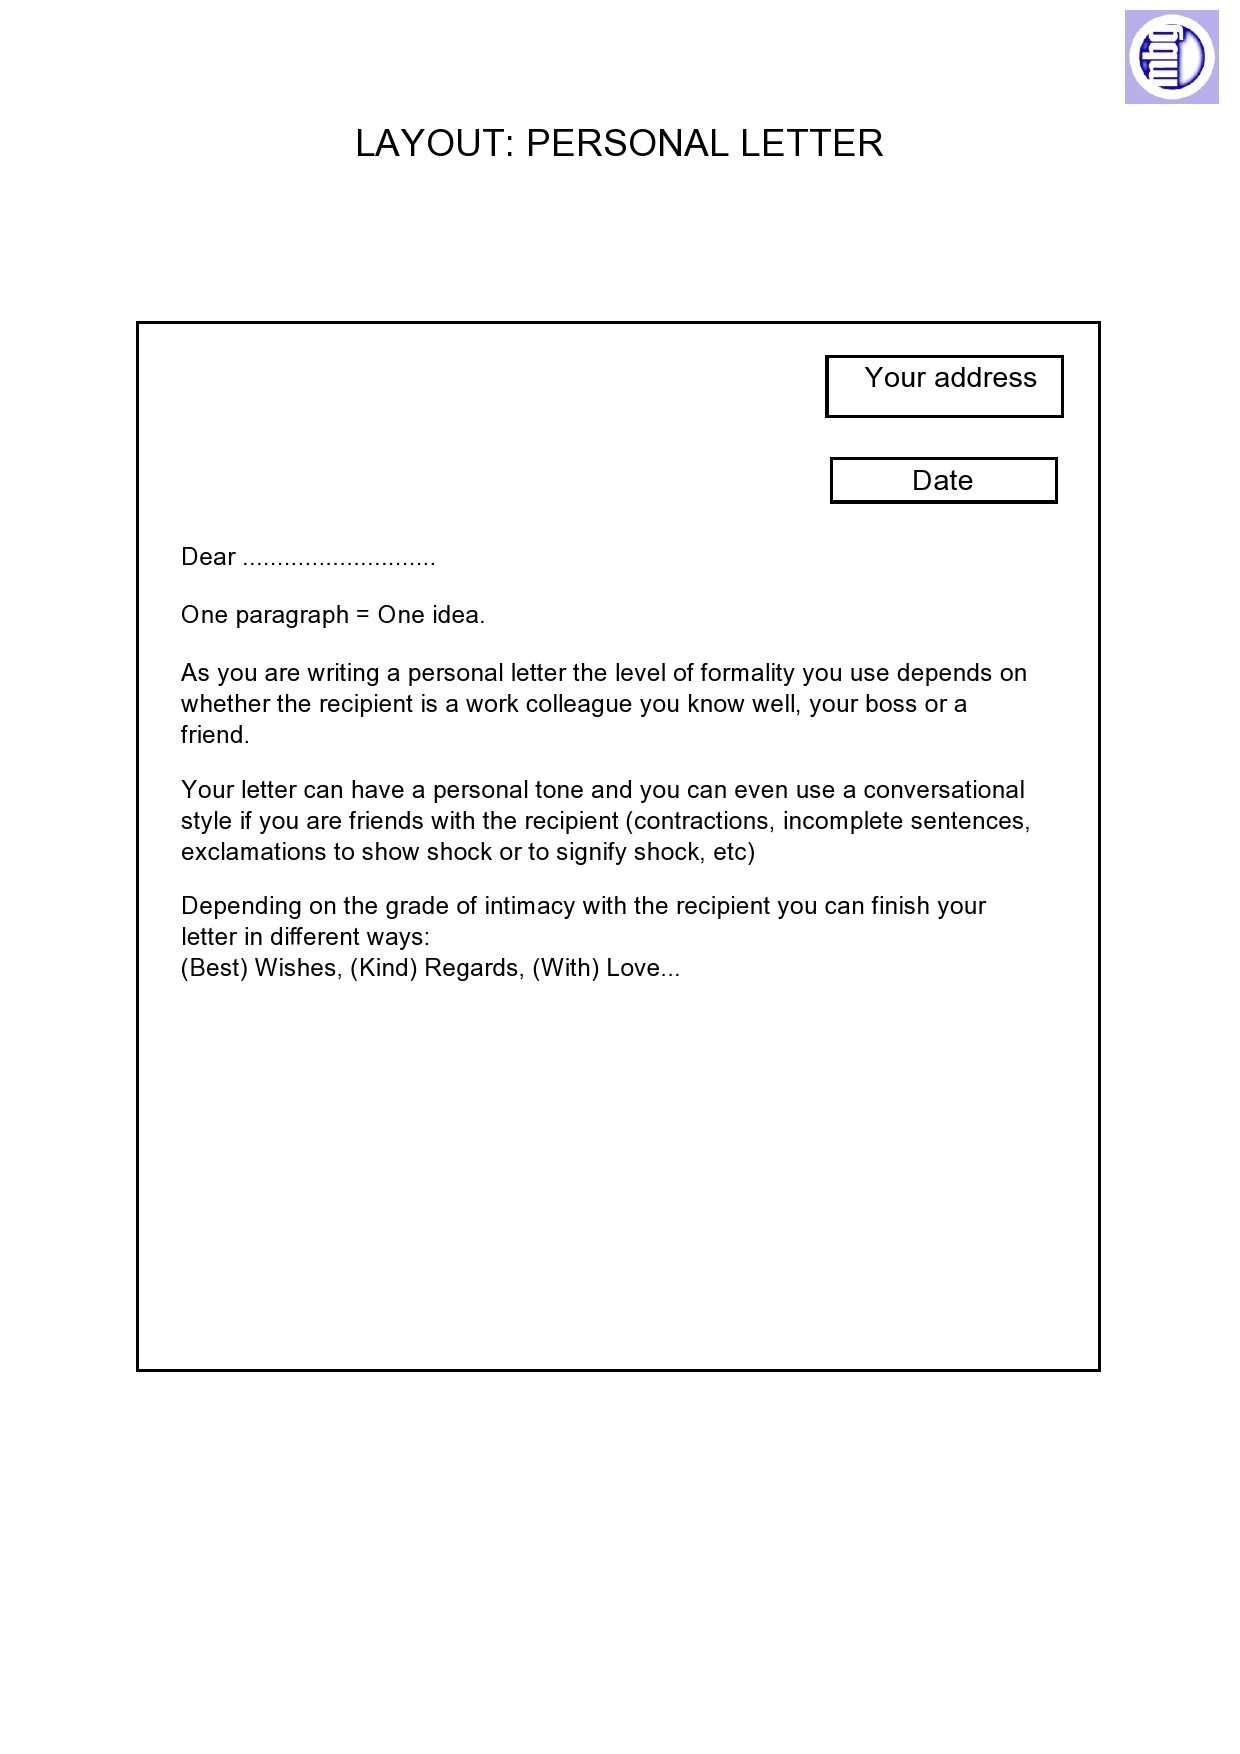 47-best-personal-letter-format-templates-100-free